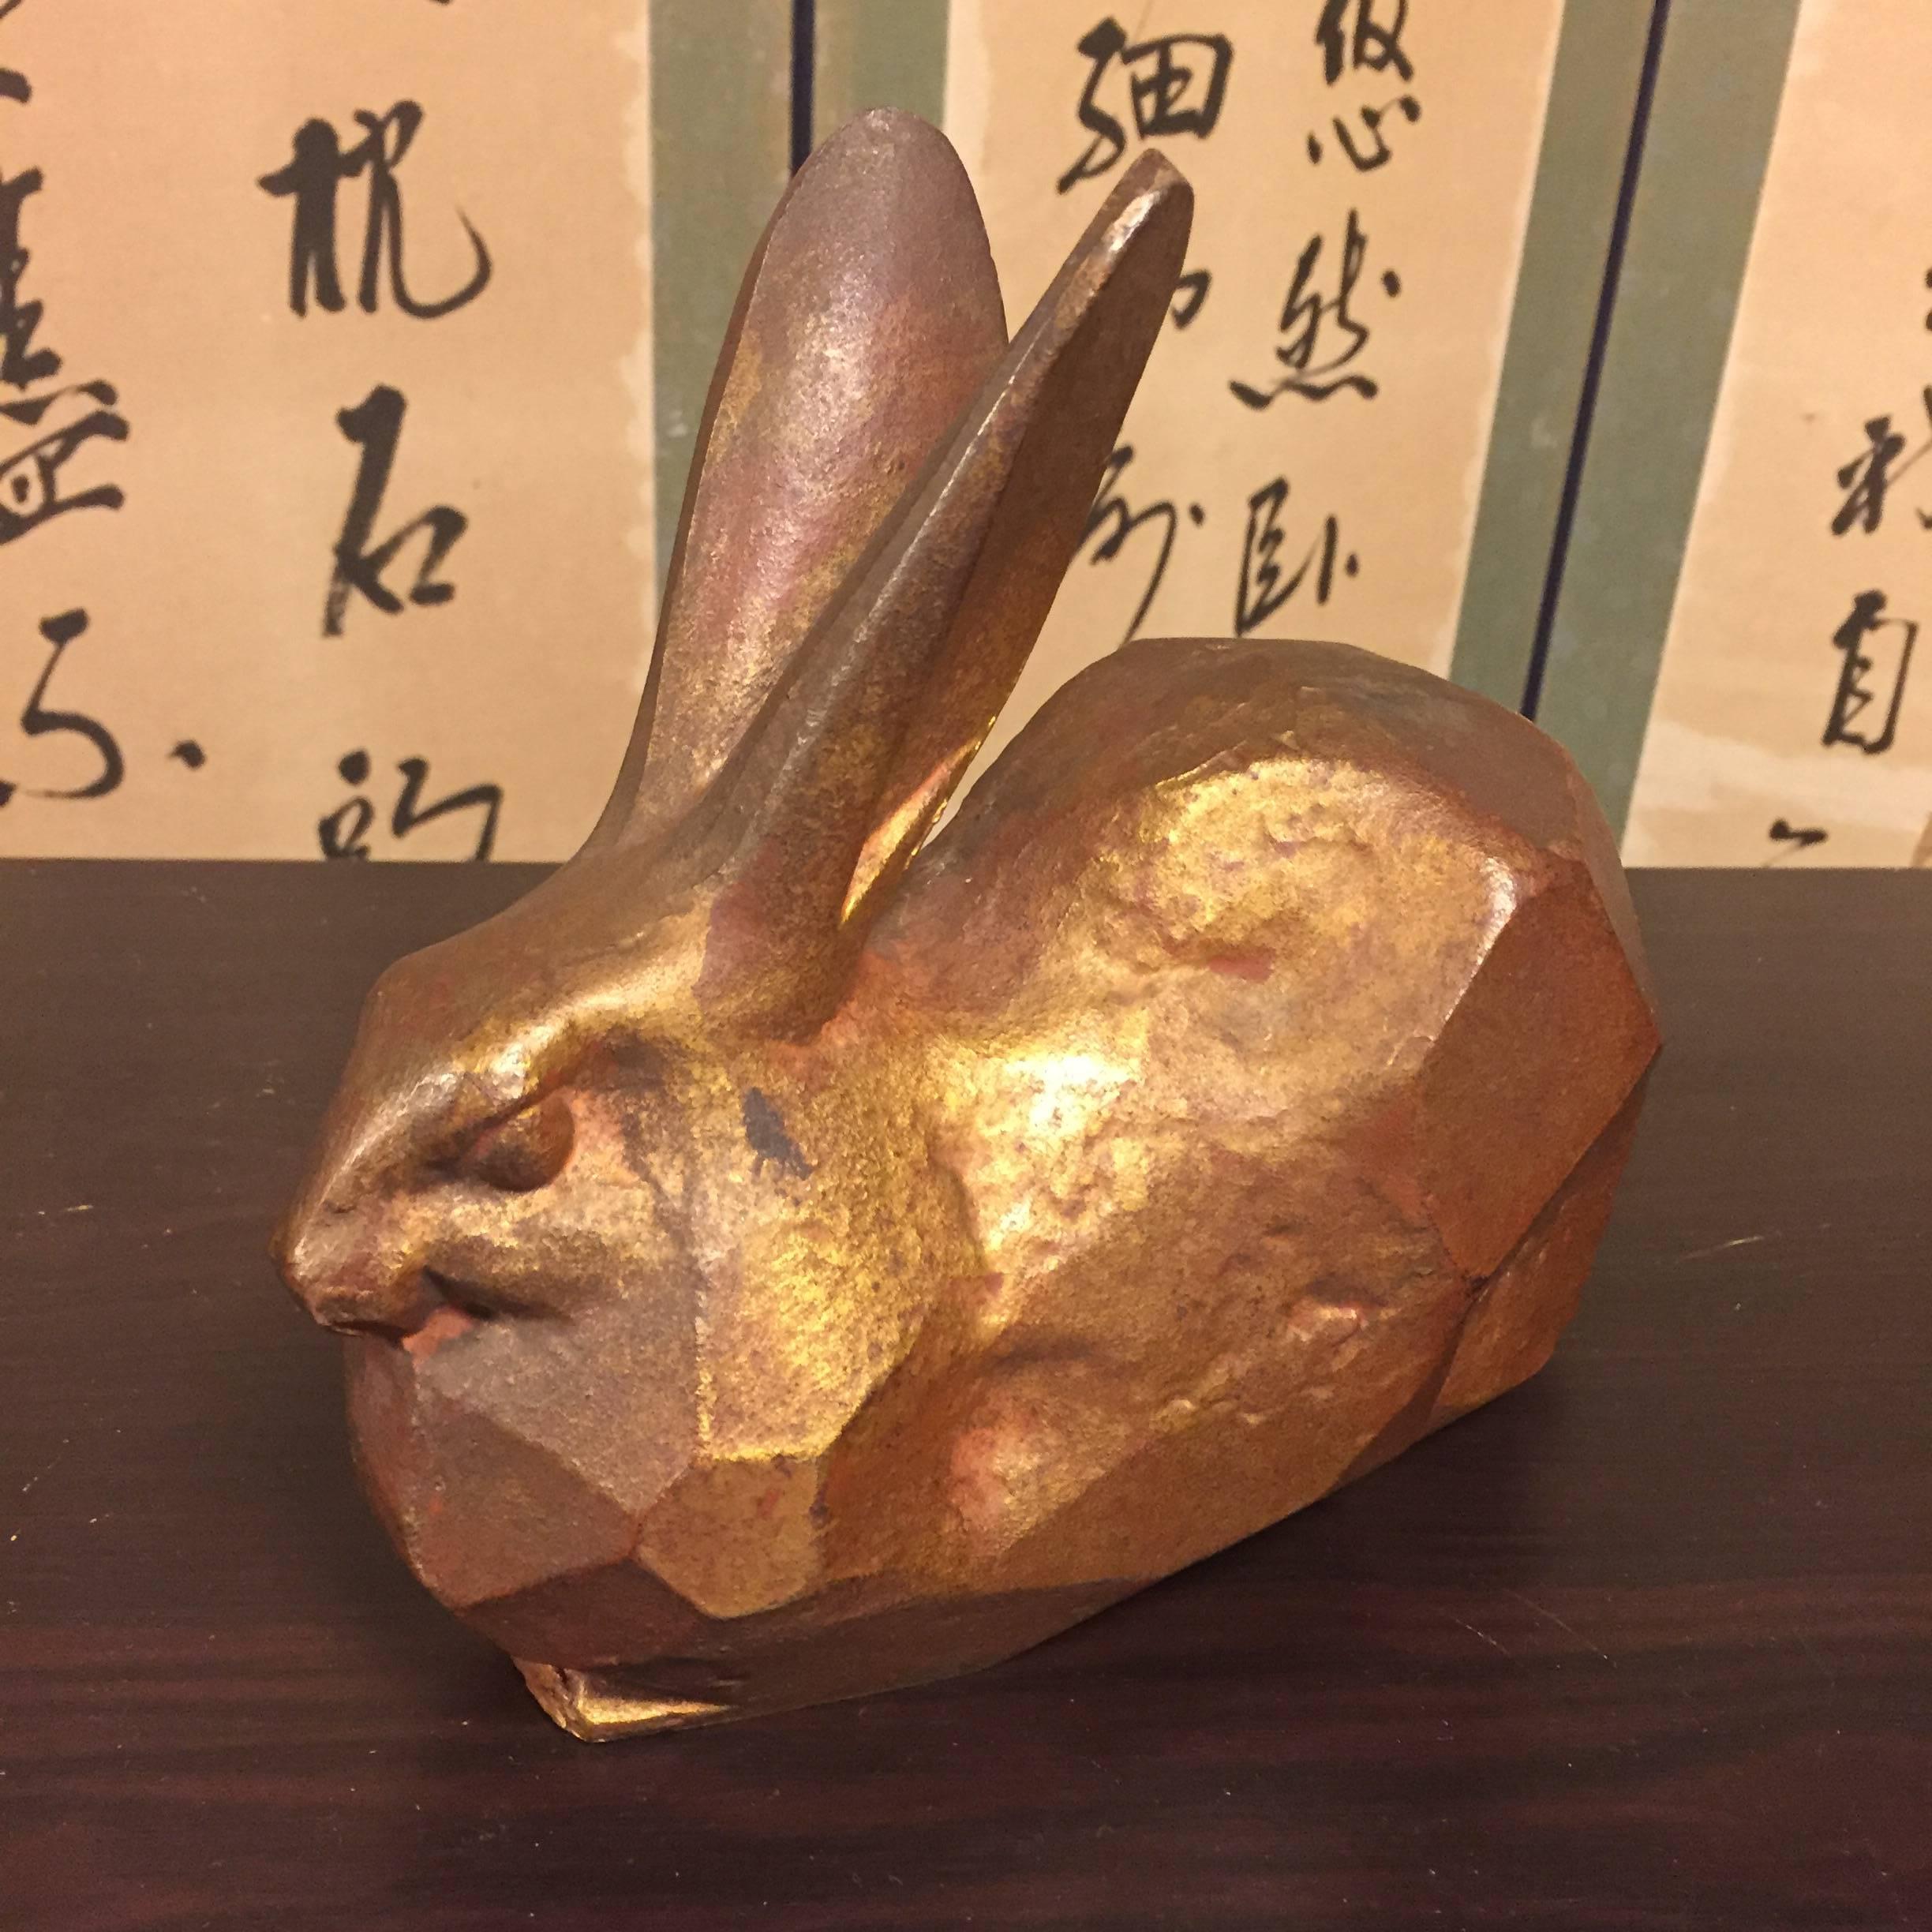 Japanese Big Eared Rabbit Solid Cast with Gold Gilt Highlights Perfect Indoor Outdoor